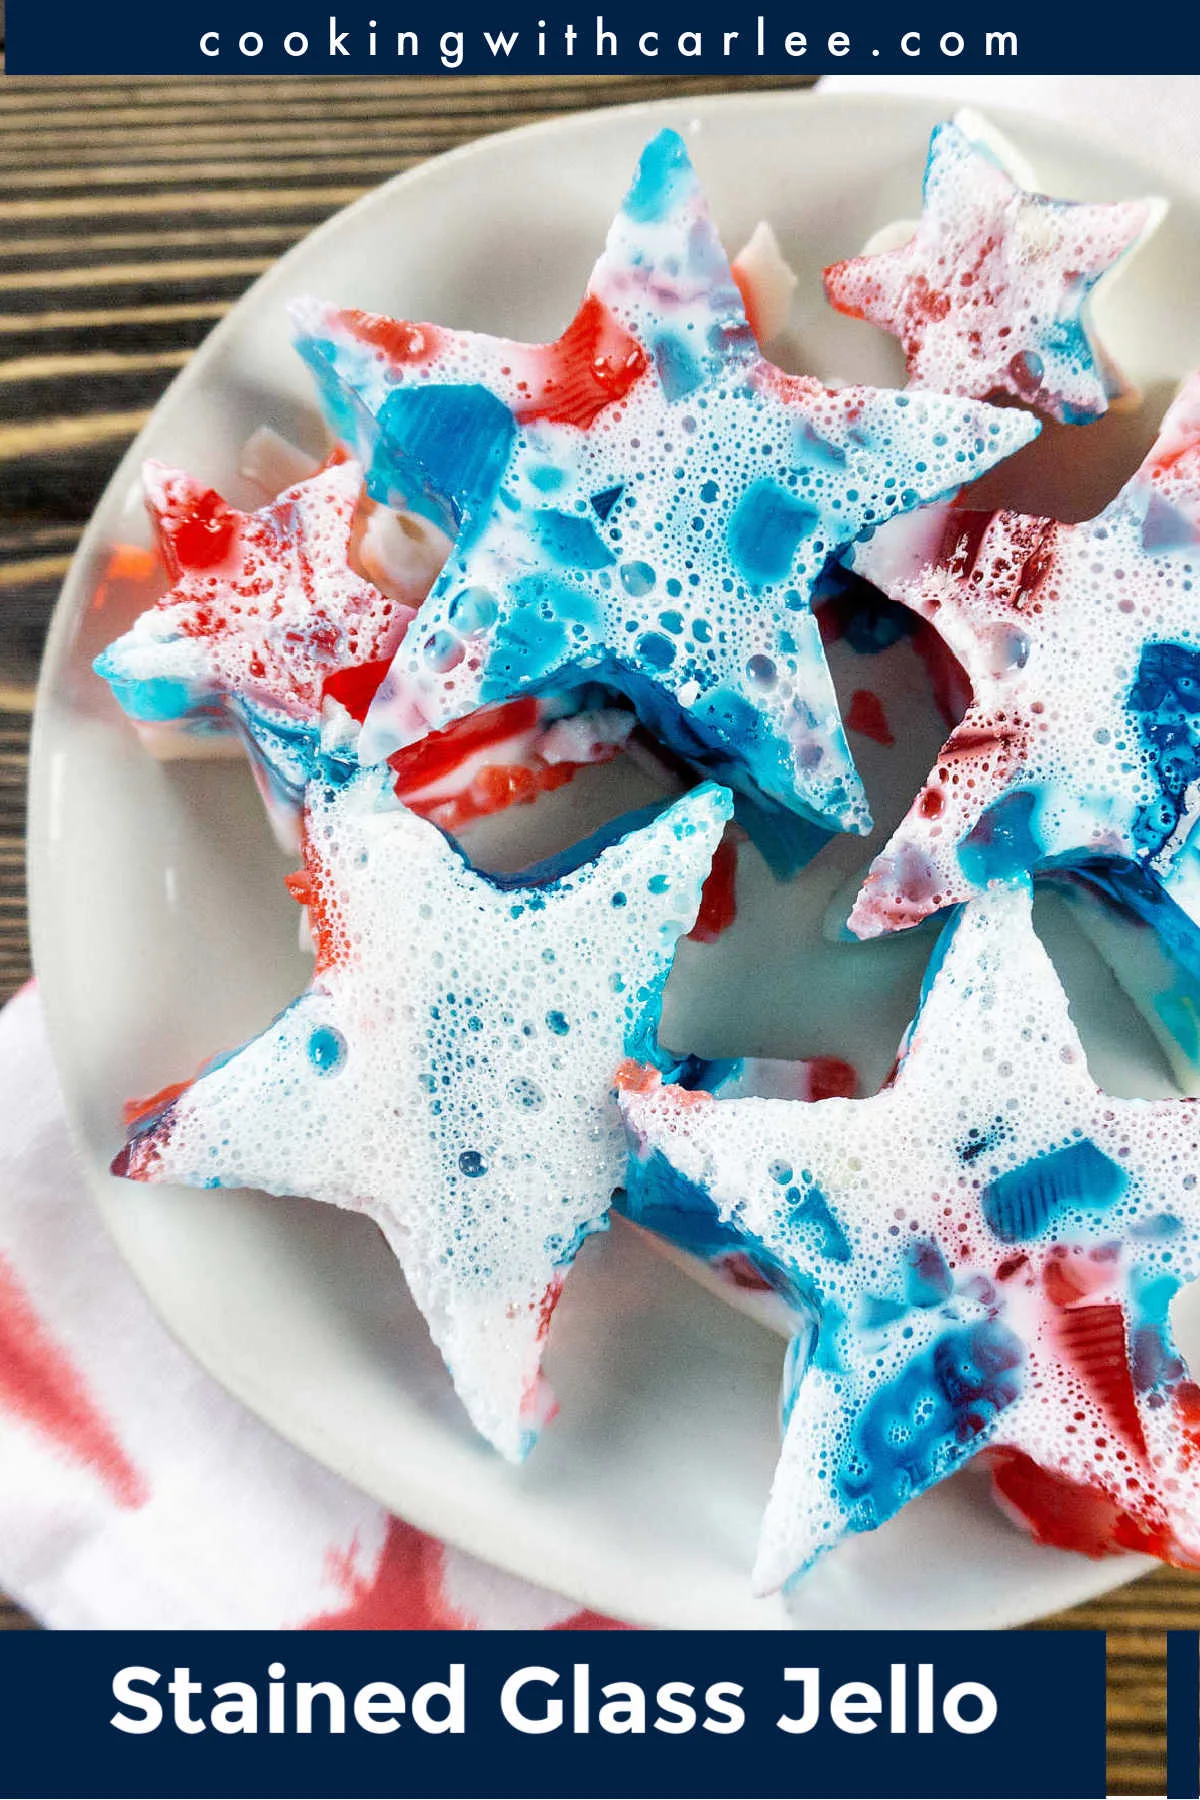 This fun red white and blue stained glass jello is perfect for patriotic summer holidays like Memorial Day and the Fourth of July. However you can mix and match the colors to make it perfect for any holiday or event.